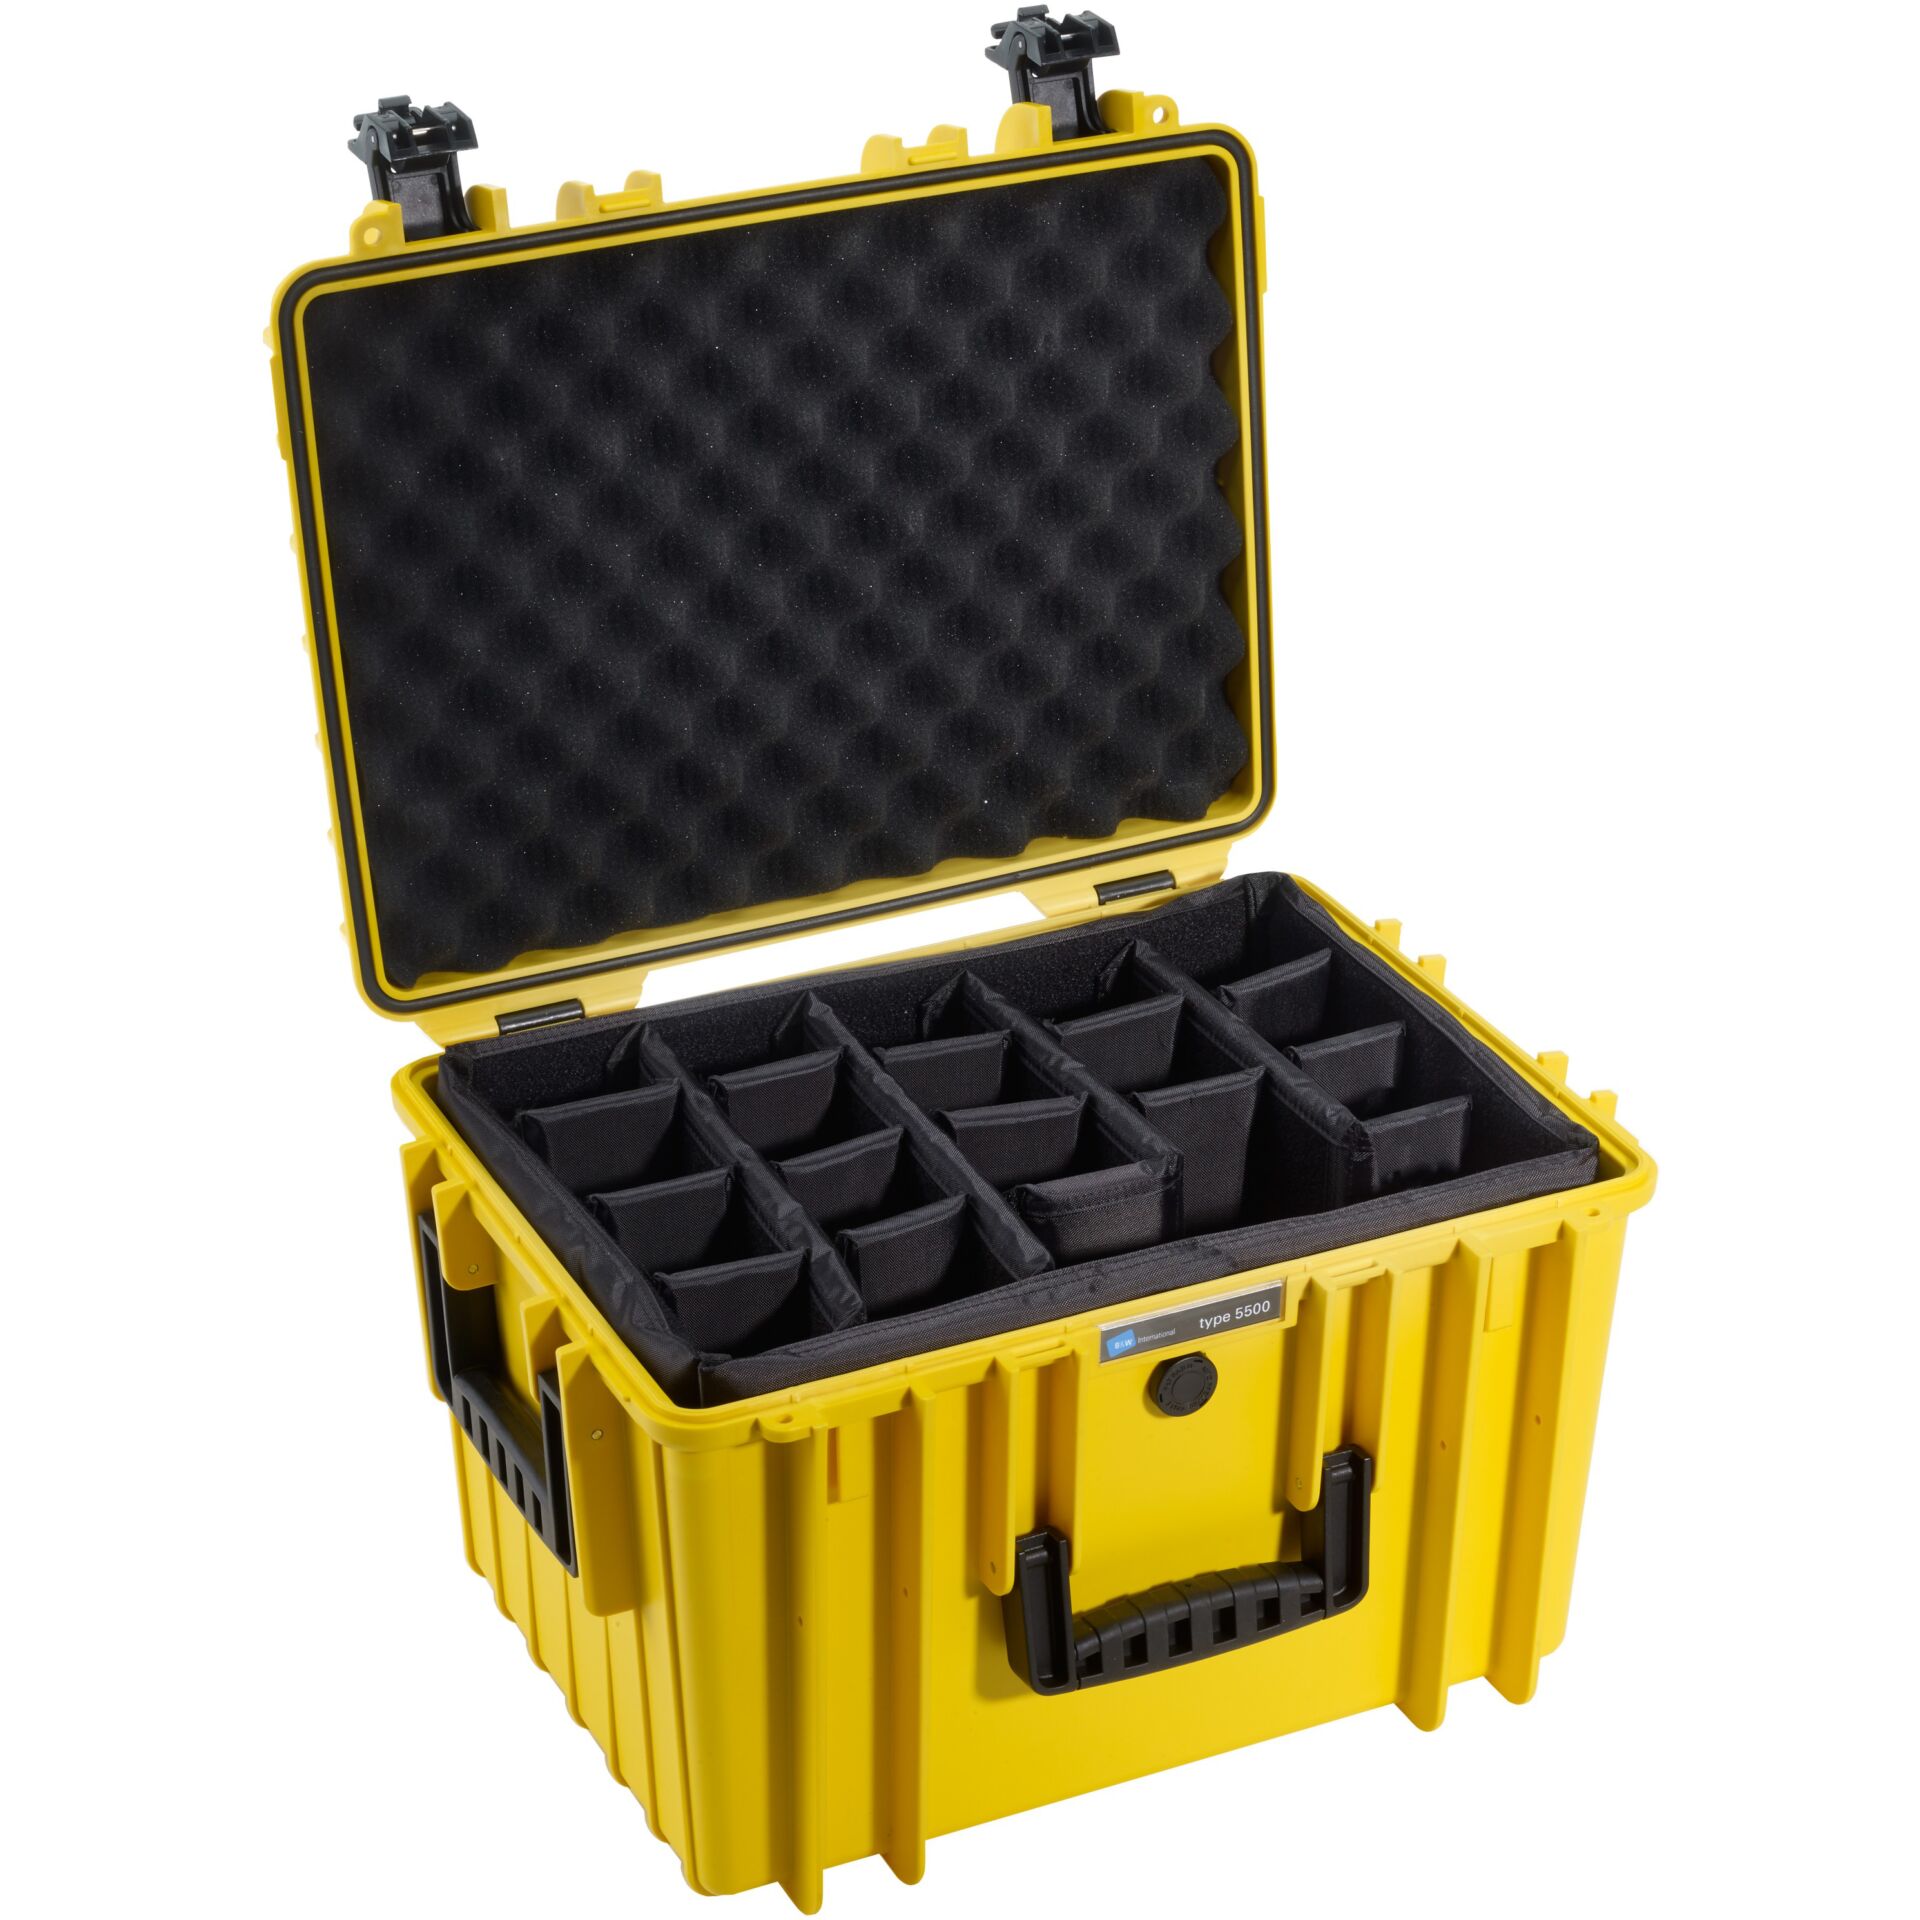 B&W Outdoor Case 5500 incl. divider system yellow